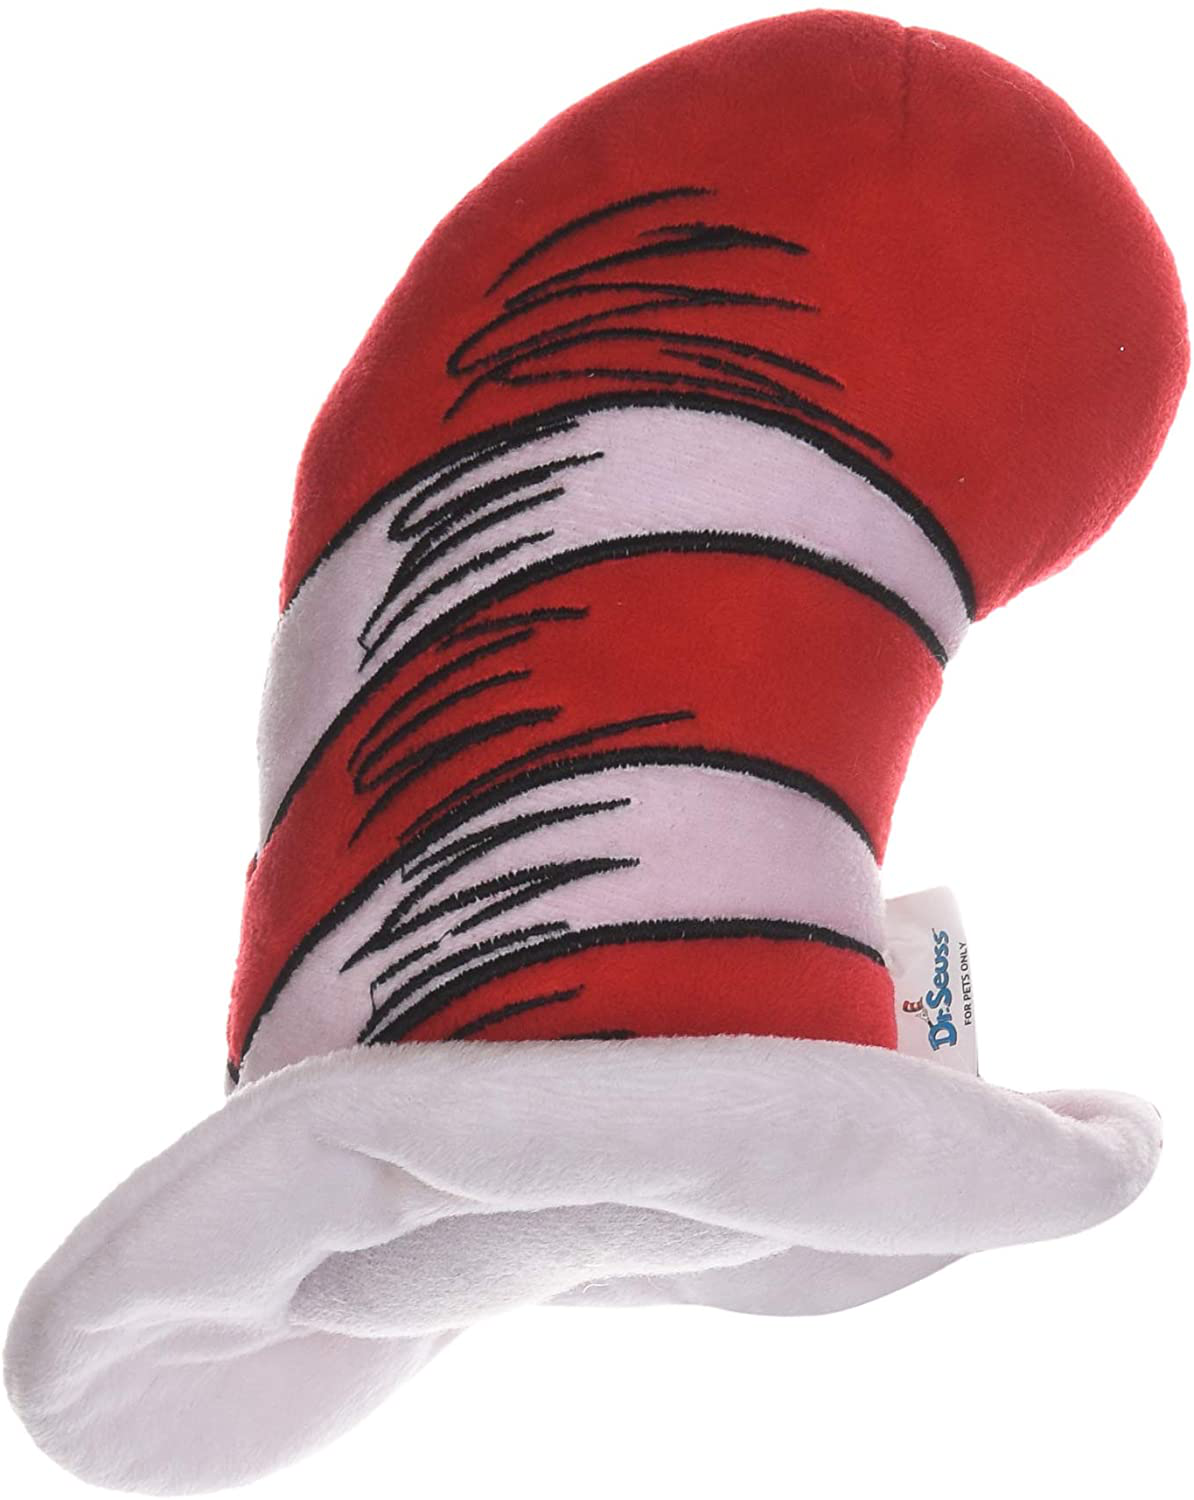 Dr. Seuss the Cat in the Hat Plush Dog Toys - Dog Toy for All Sized Dogs, the Cat in the Hat -Stuffed Animal Dog Toy from Dr. Seuss Collection Available in Multiple Styles Animals & Pet Supplies > Pet Supplies > Dog Supplies > Dog Toys Dr. Seuss for Pets Hat Plush Figure 6 in 